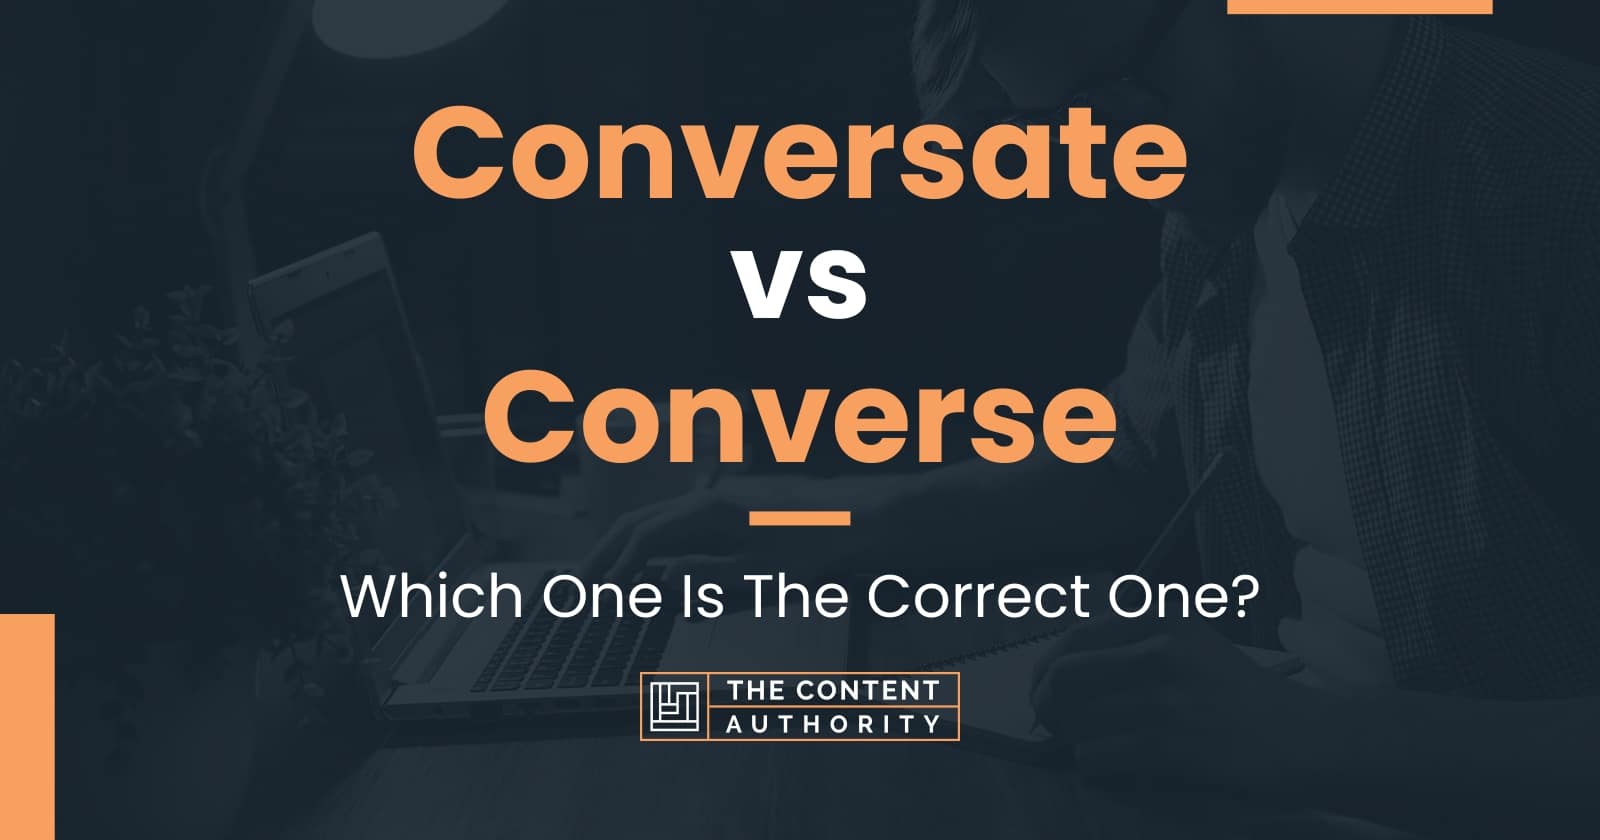 Scully forbundet aflevere Conversate vs Converse: Which One Is The Correct One?